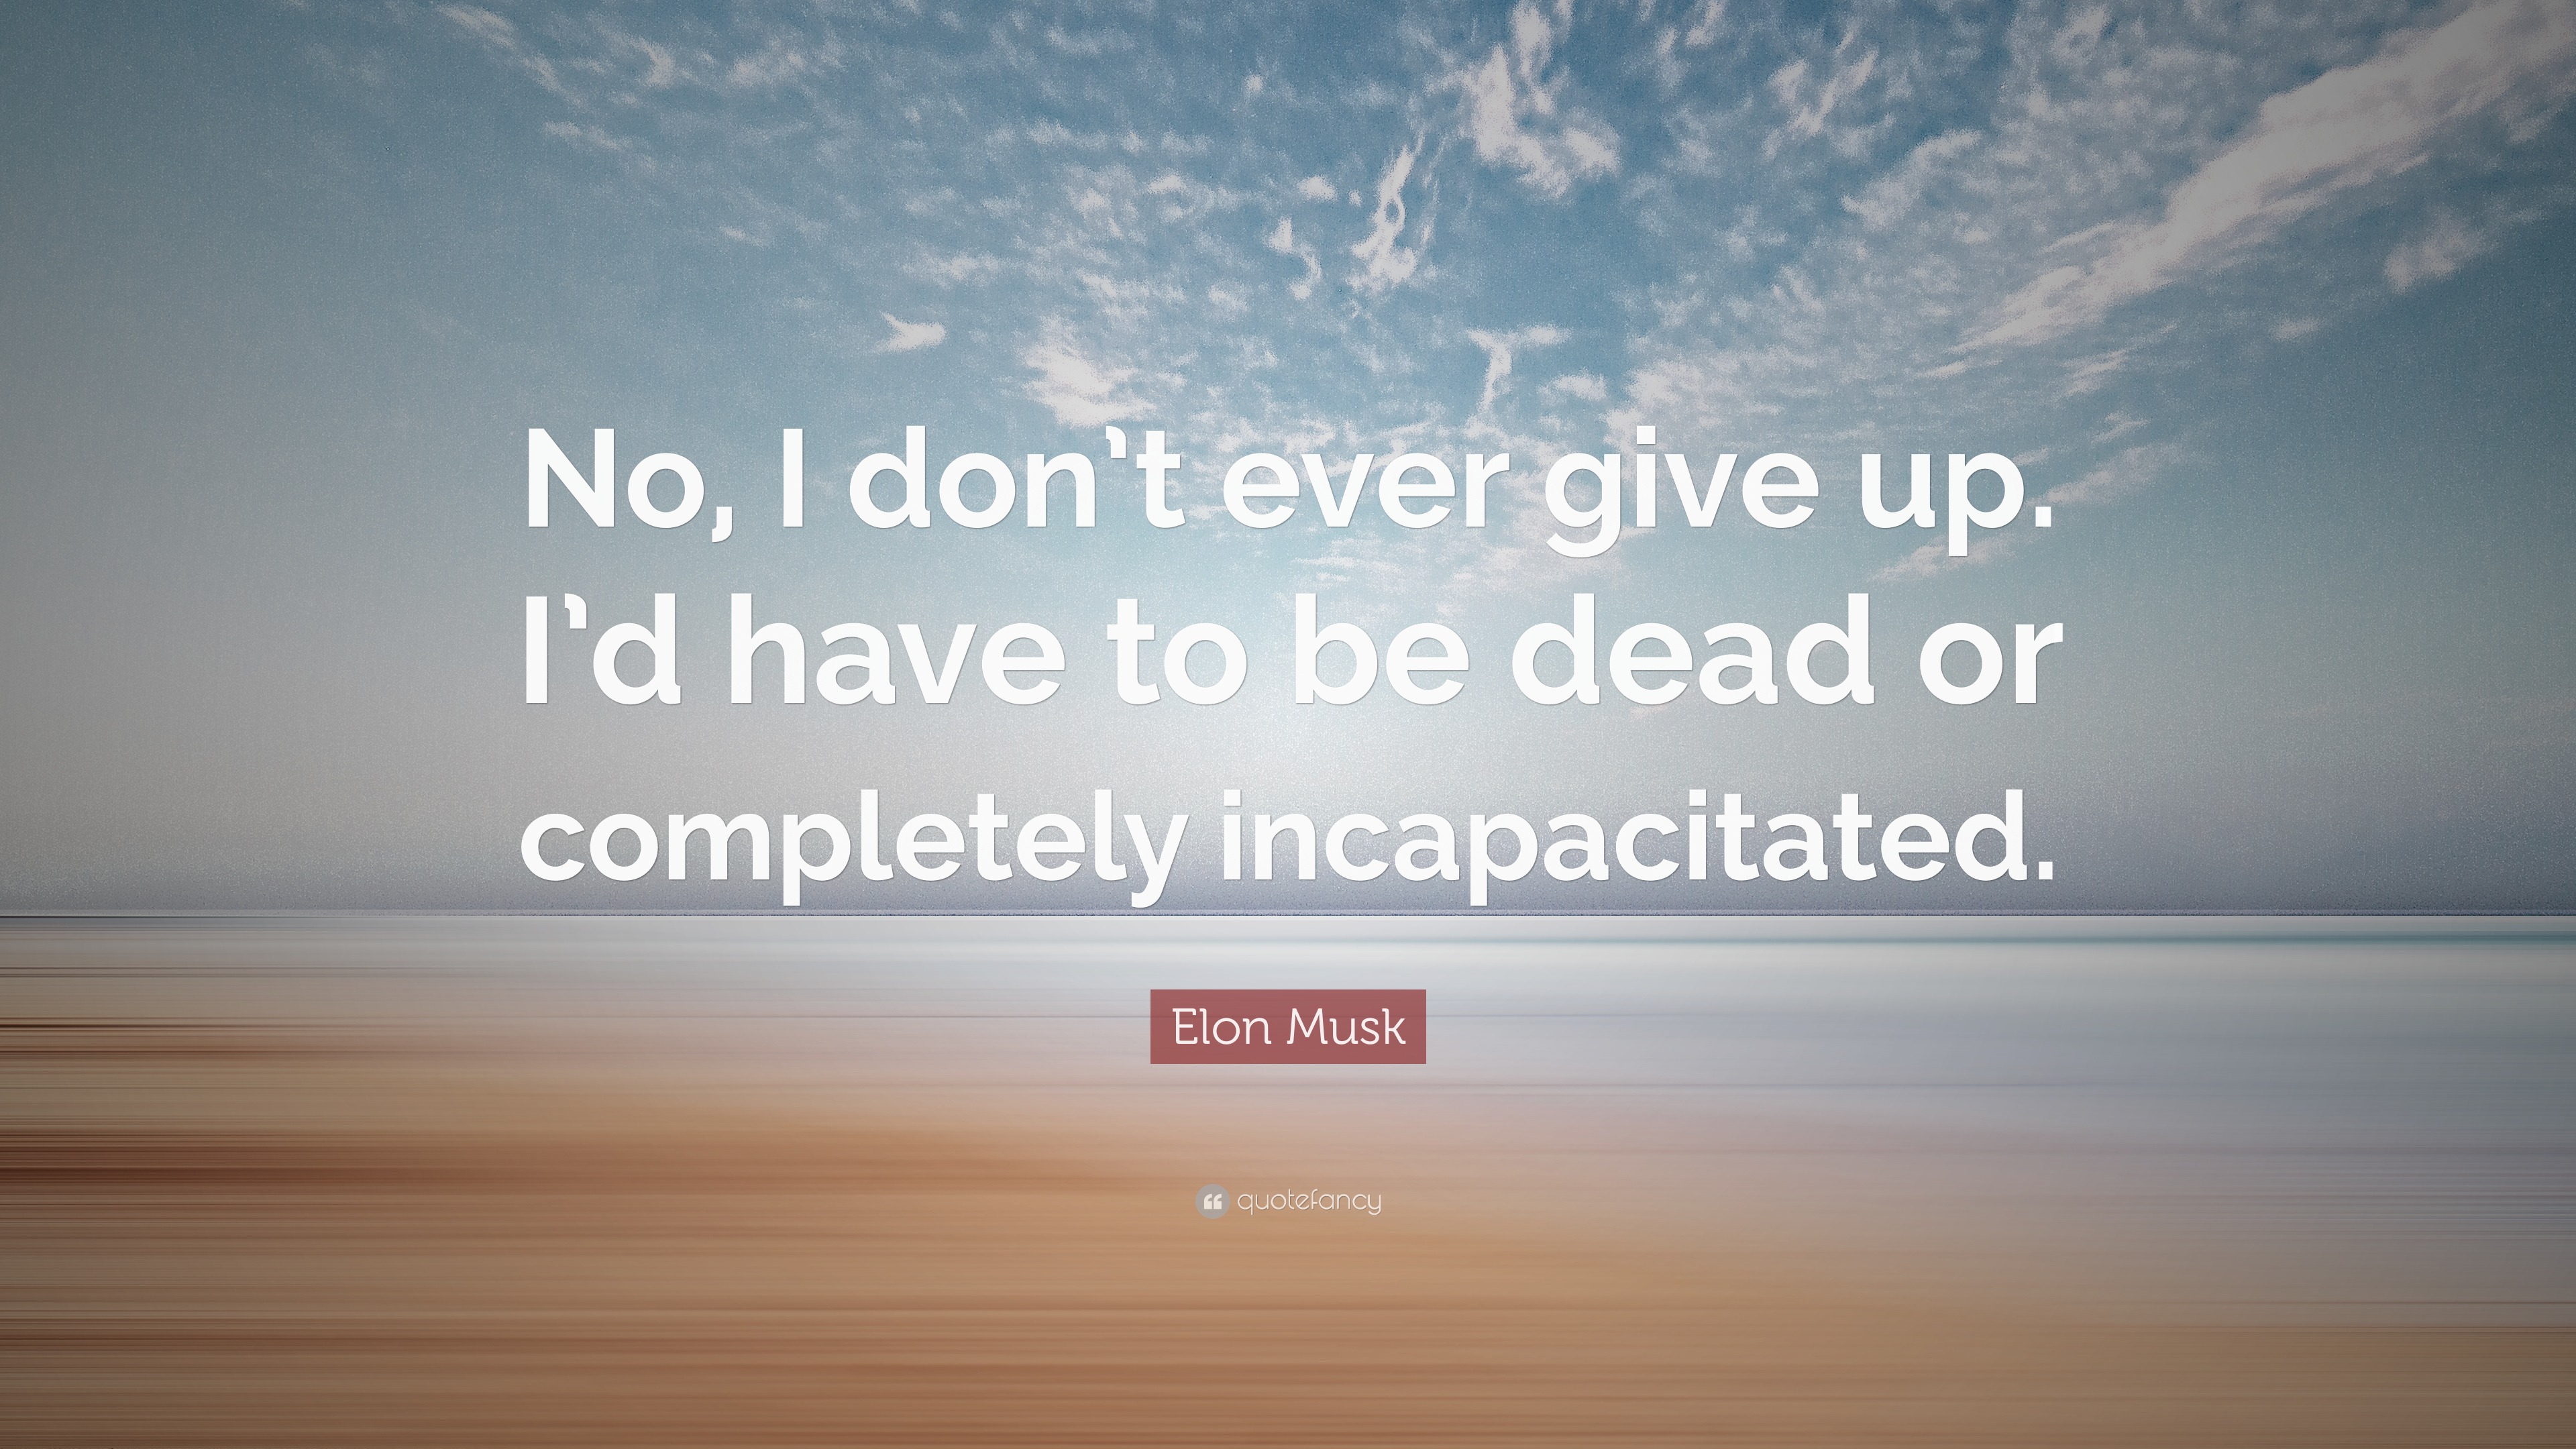 Elon Musk Quote: “No, I don’t ever give up. I’d have to be dead or ...